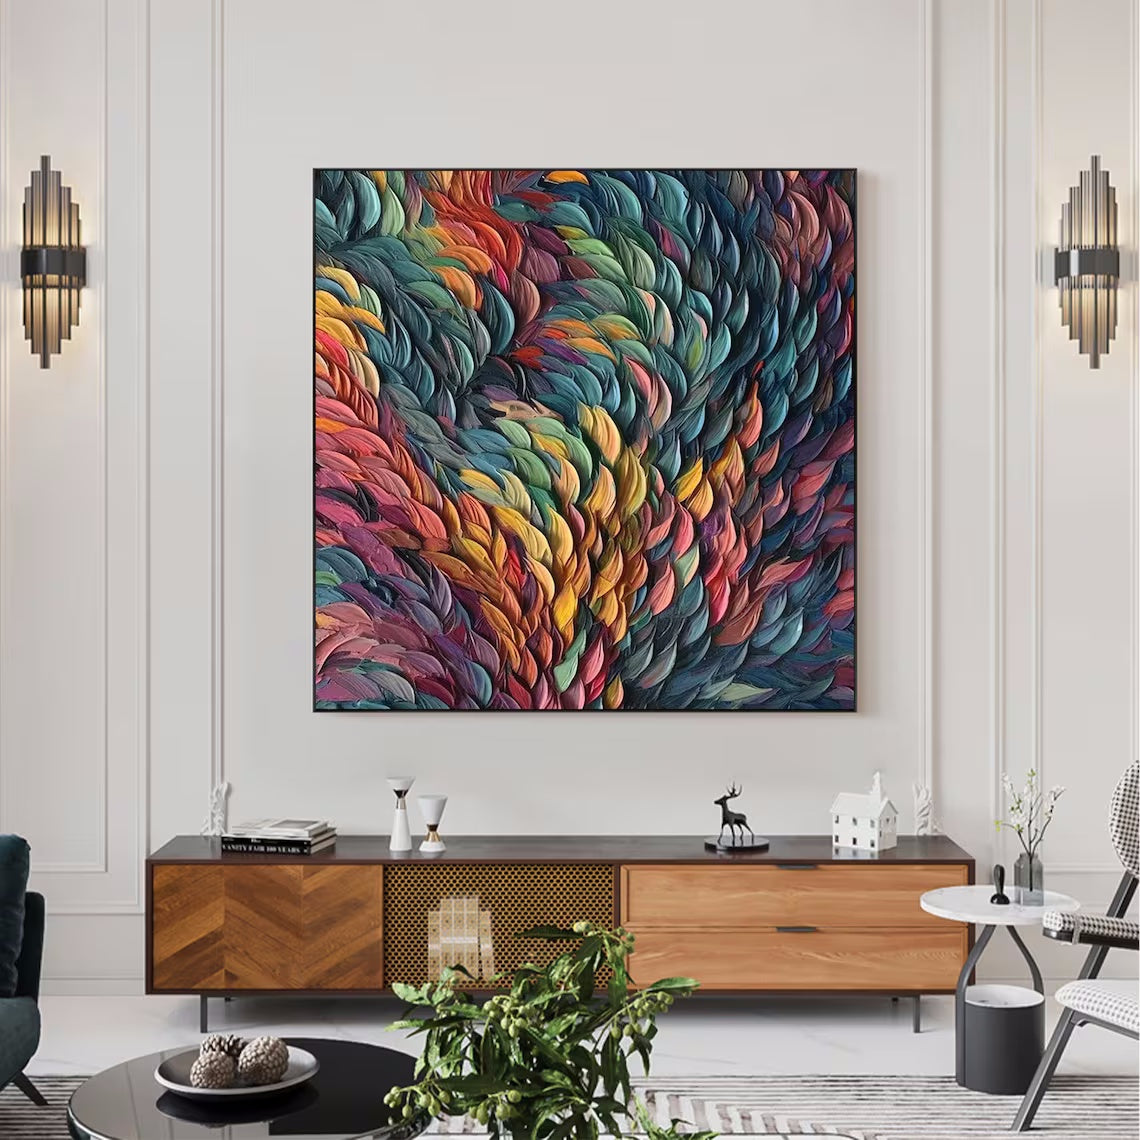 A Symphony of Colors: Reveling in the Vibrancy of Abstract Art